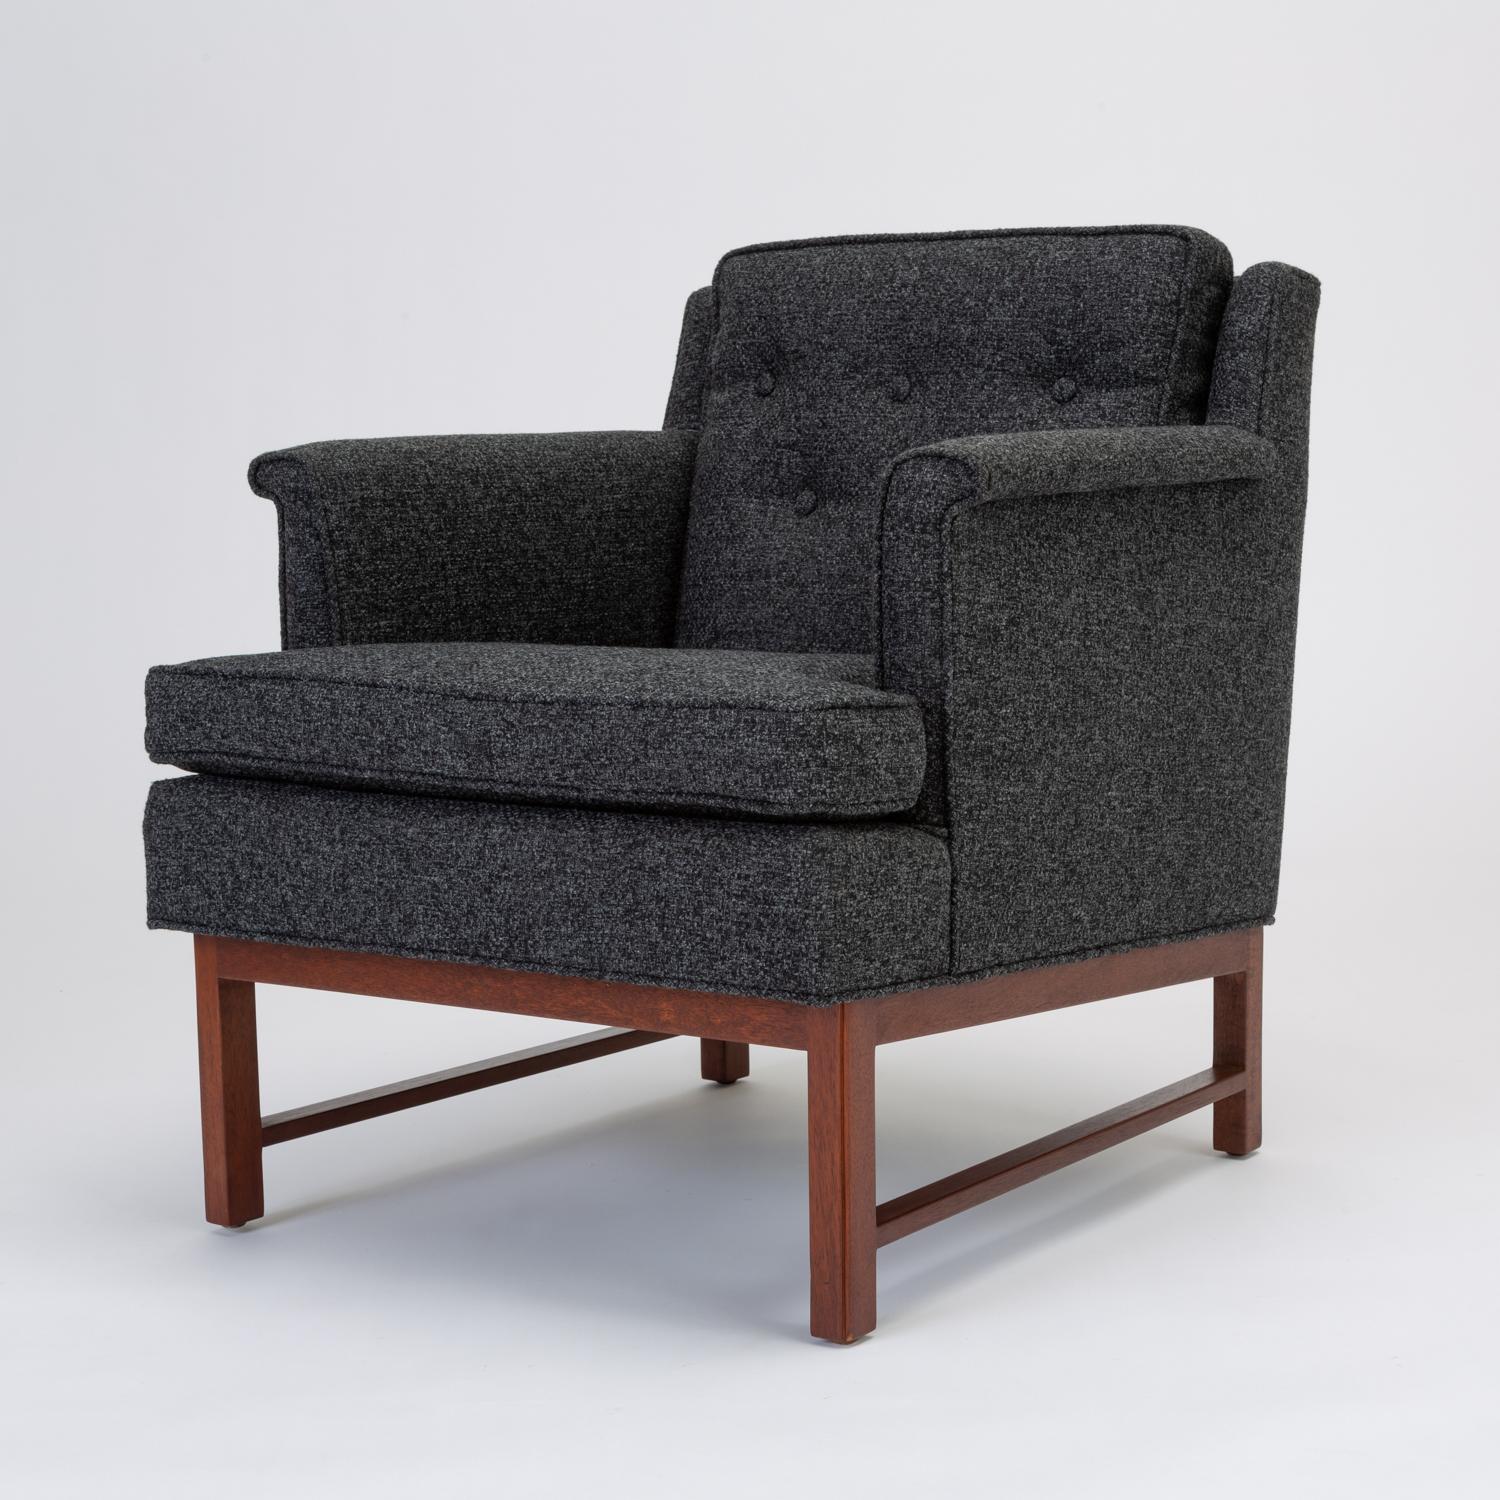 Pair of Petite Lounge Chairs by Edward Wormley for Dunbar 6